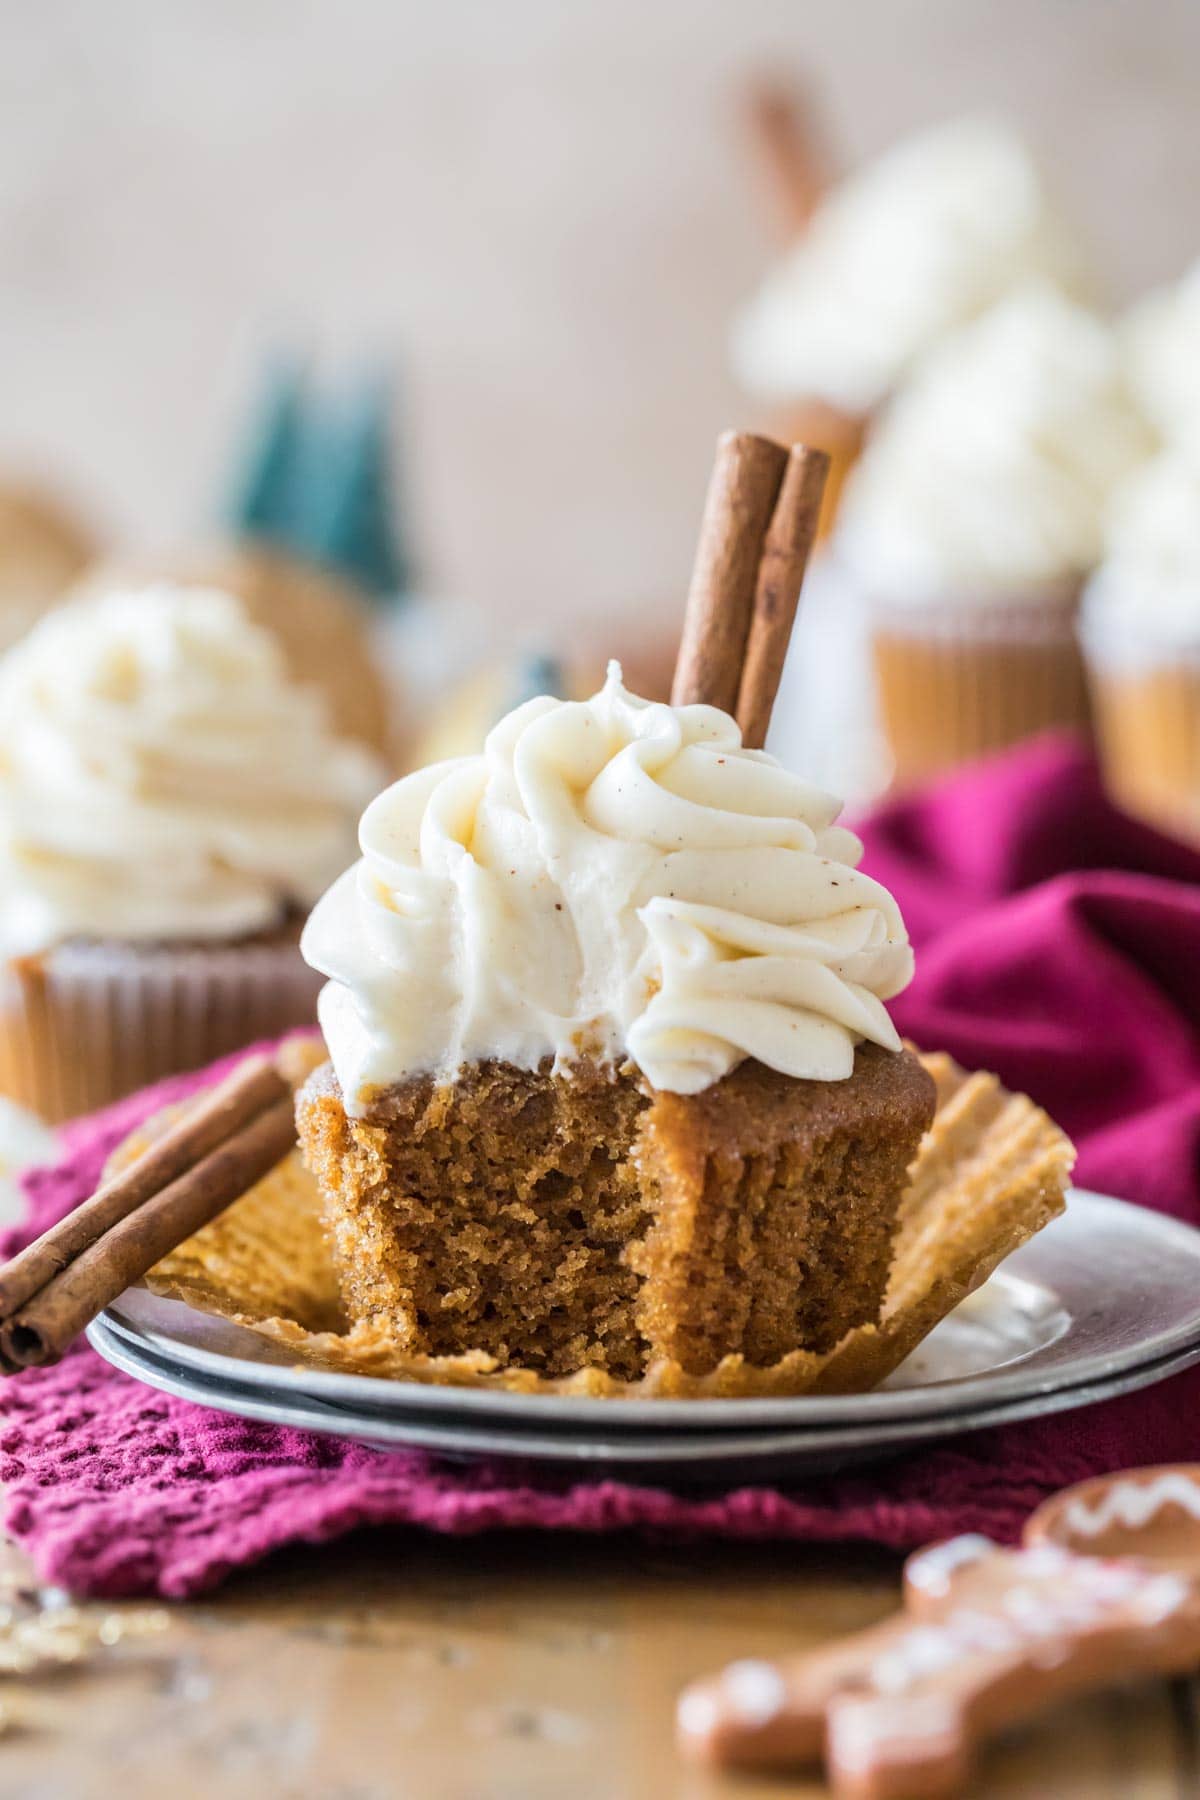 Unwrapped cupcake with piped frosting and a cinnamon stick garnish with one bite missing.